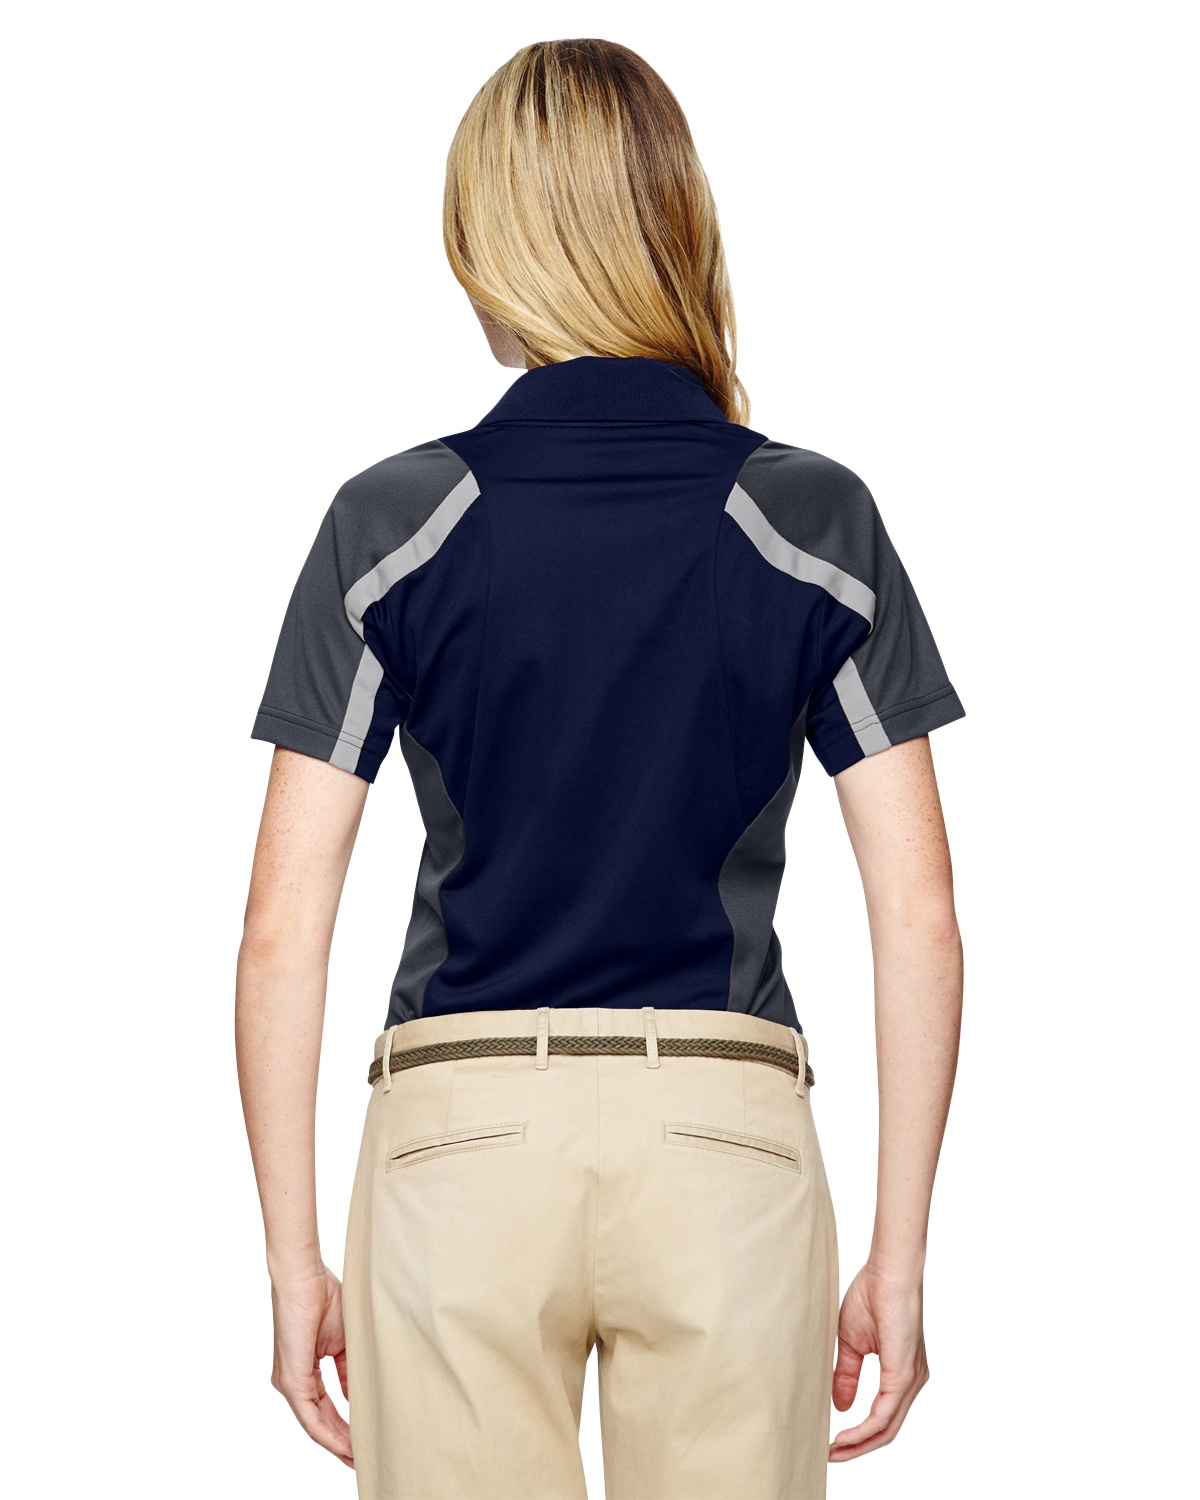 'Ash City - Extreme 75119 Ladies Eperformance Strike Colorblock Snag Protection Polo'